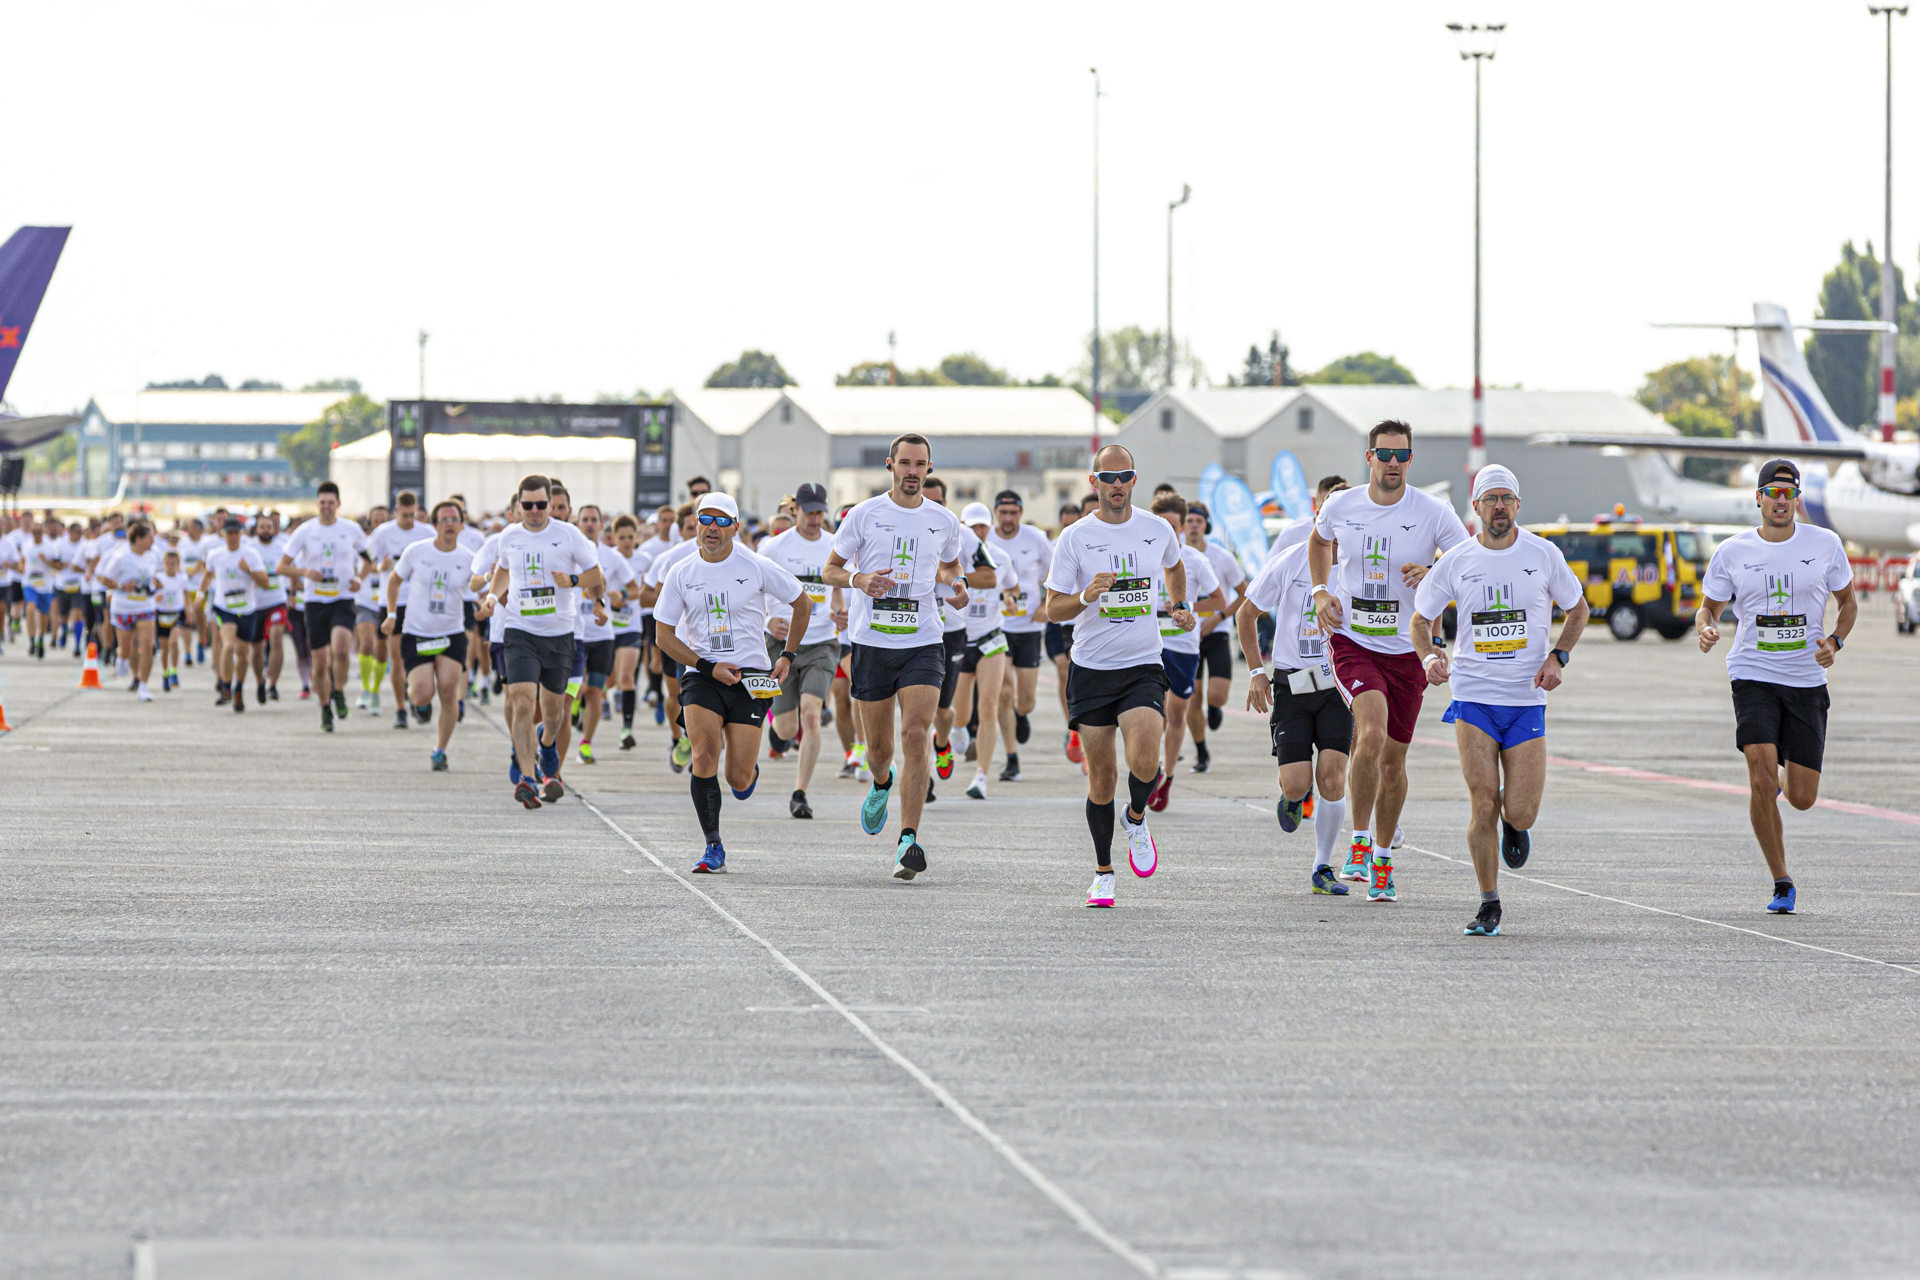 Budapest Airport to organize 10th Runway Run in September